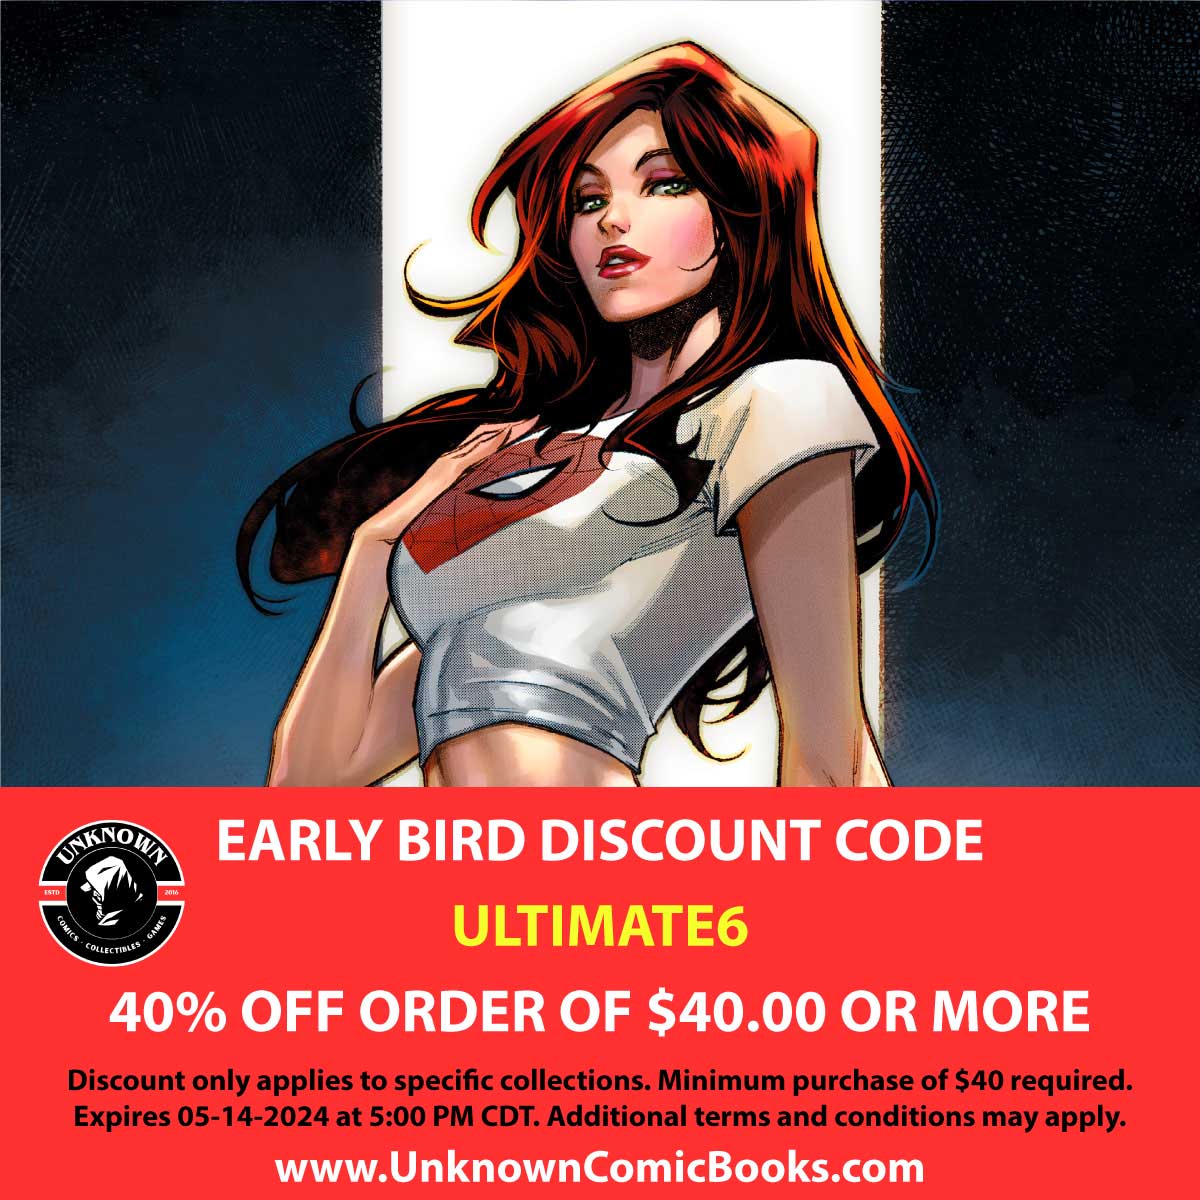 Heads up, Spidey fans! ⏰ Pre-order the Ultimate Spider-Man #6 Exclusive by Segovia (featuring MJ) for 40% off (first 24 hrs only) with code ULTIMATE6! Min. $40 order. Don't miss out: UnknownComicBooks.com #UltimateSpiderMan #DiscountCode #PreOrderNow #UnknownComics